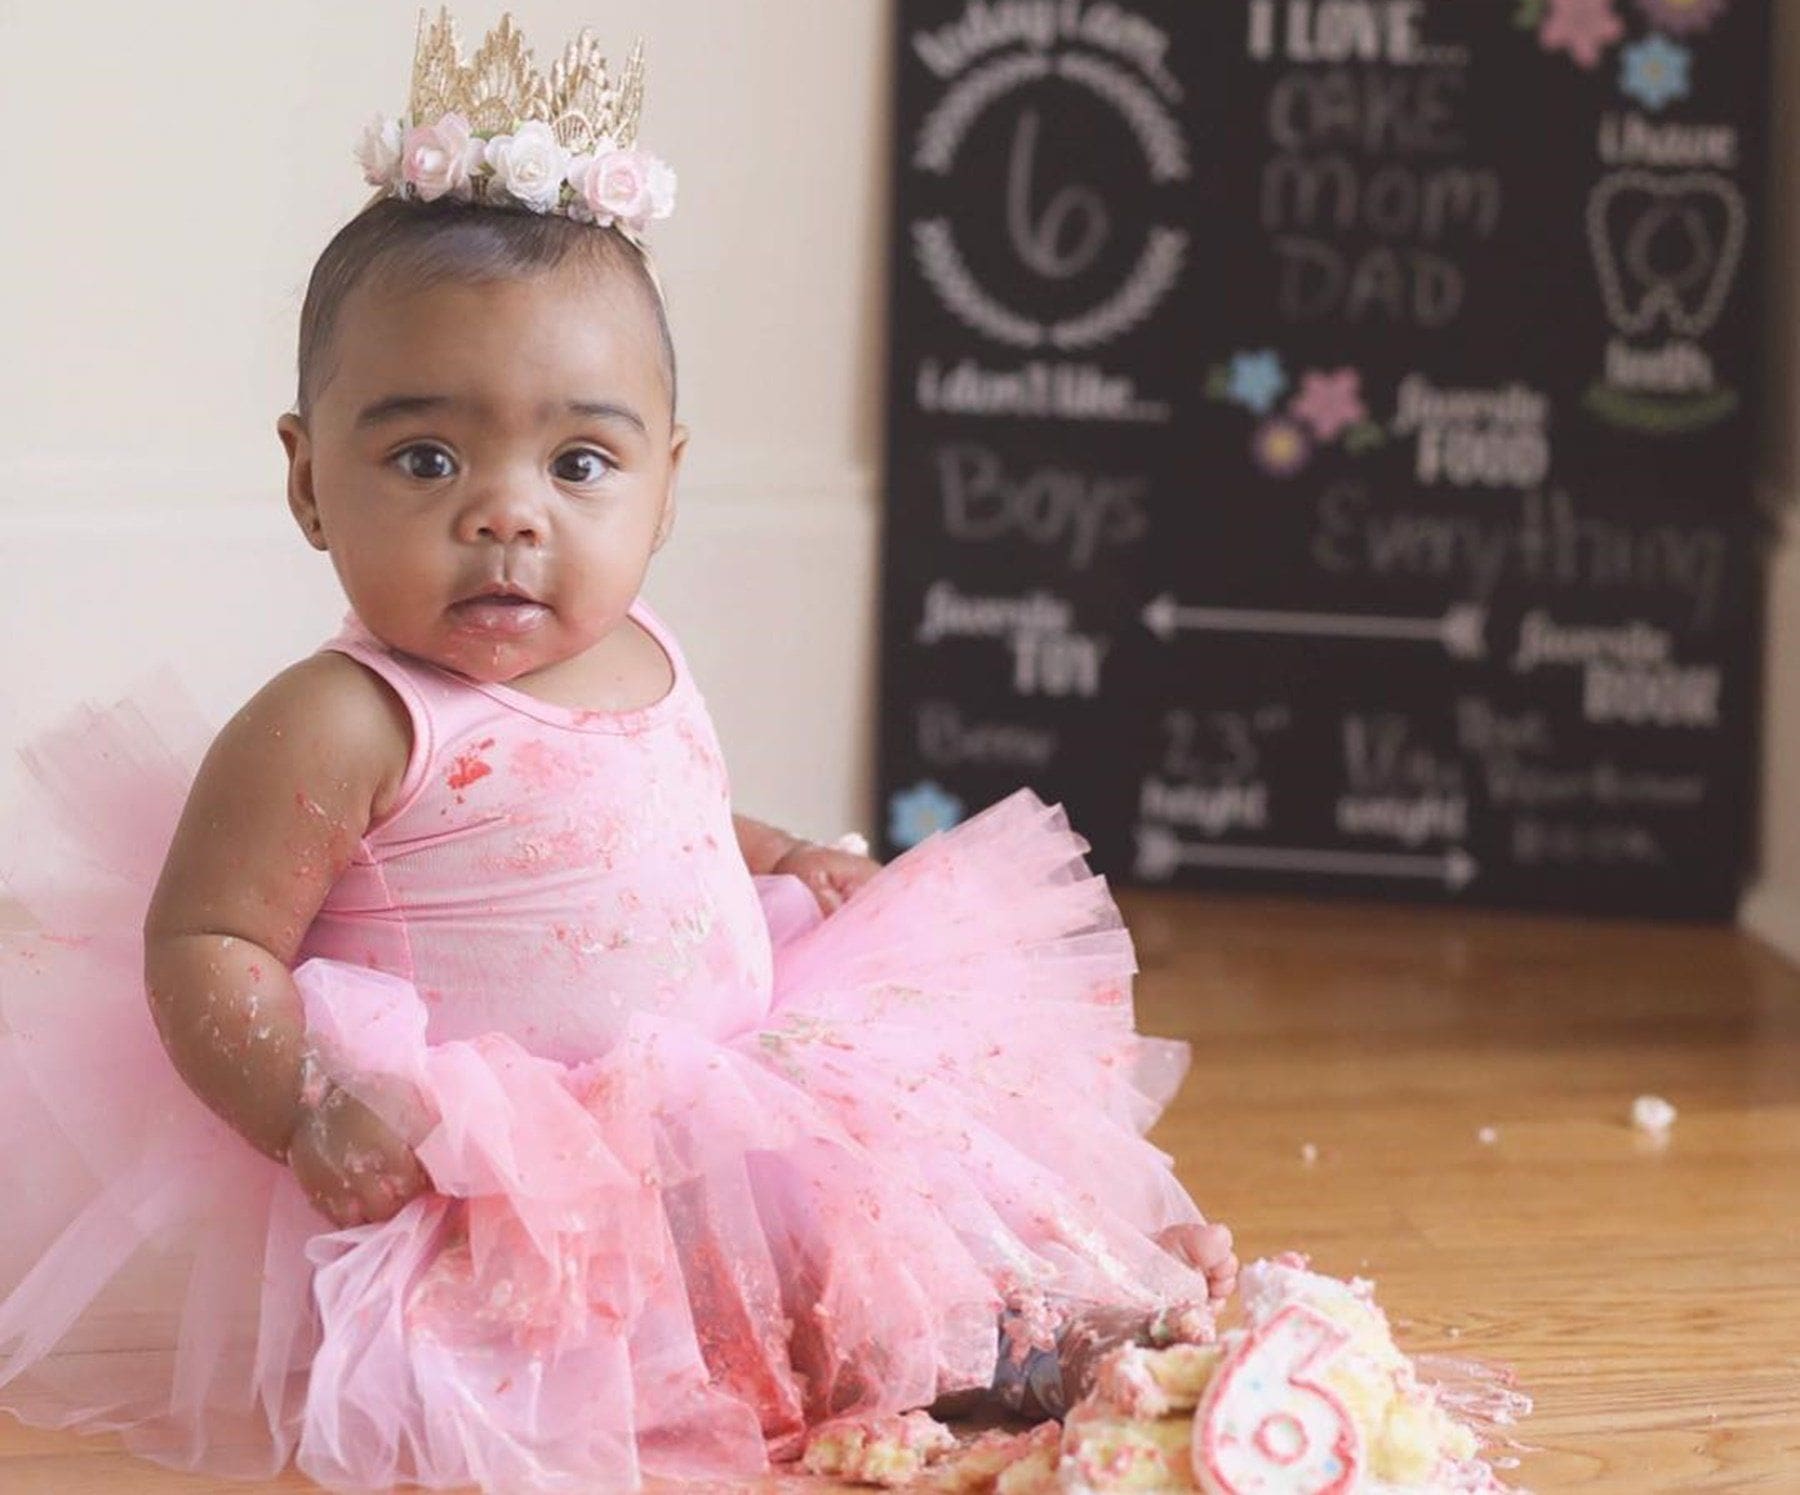 Toya Wright Cries Tears Of Joy While Announcing That Baby Reign Rushing Is Walking Just In Time For Her Birthday - See The Cute Video